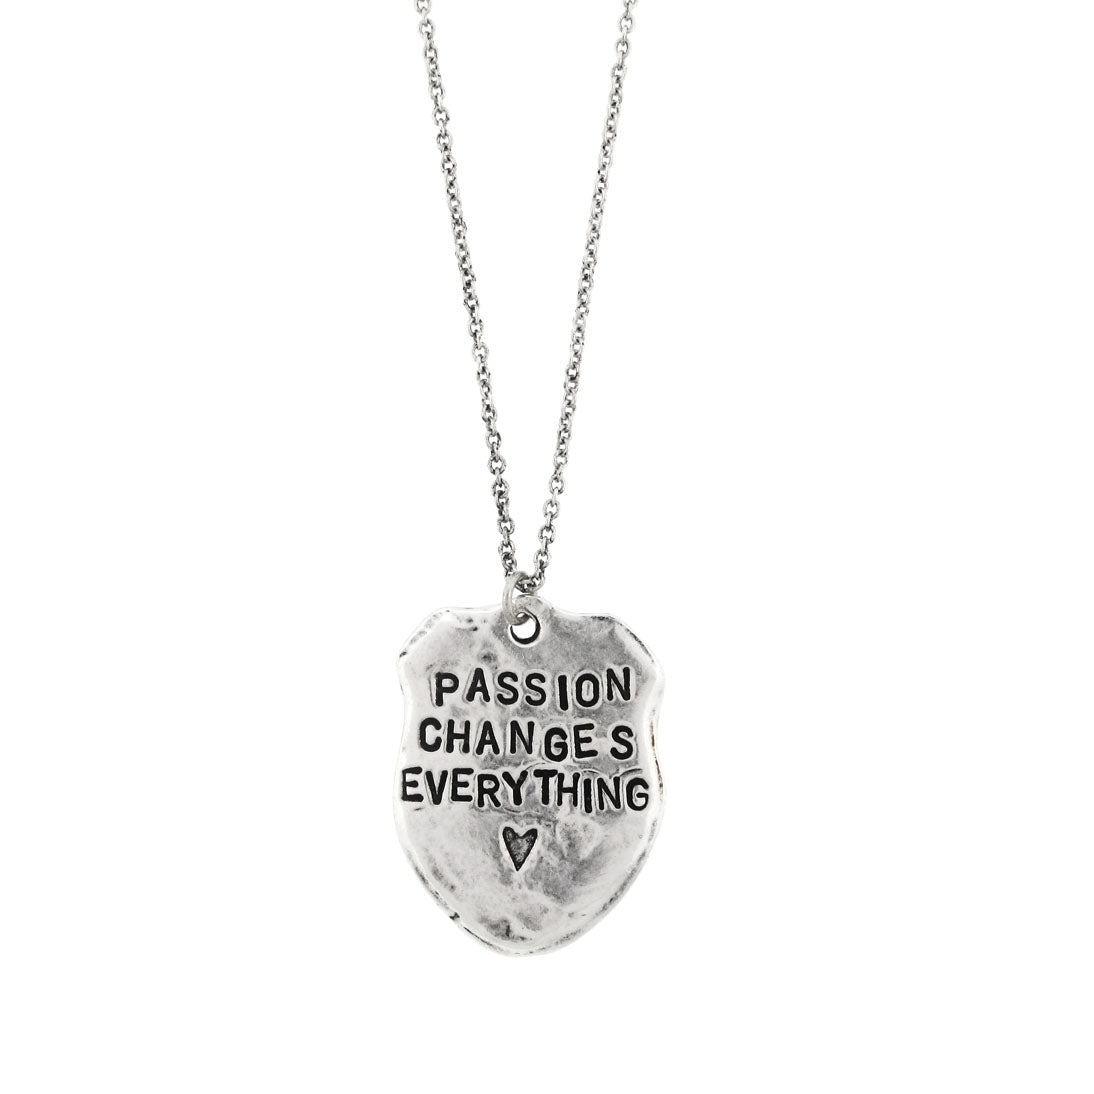 Passion changes everything necklace